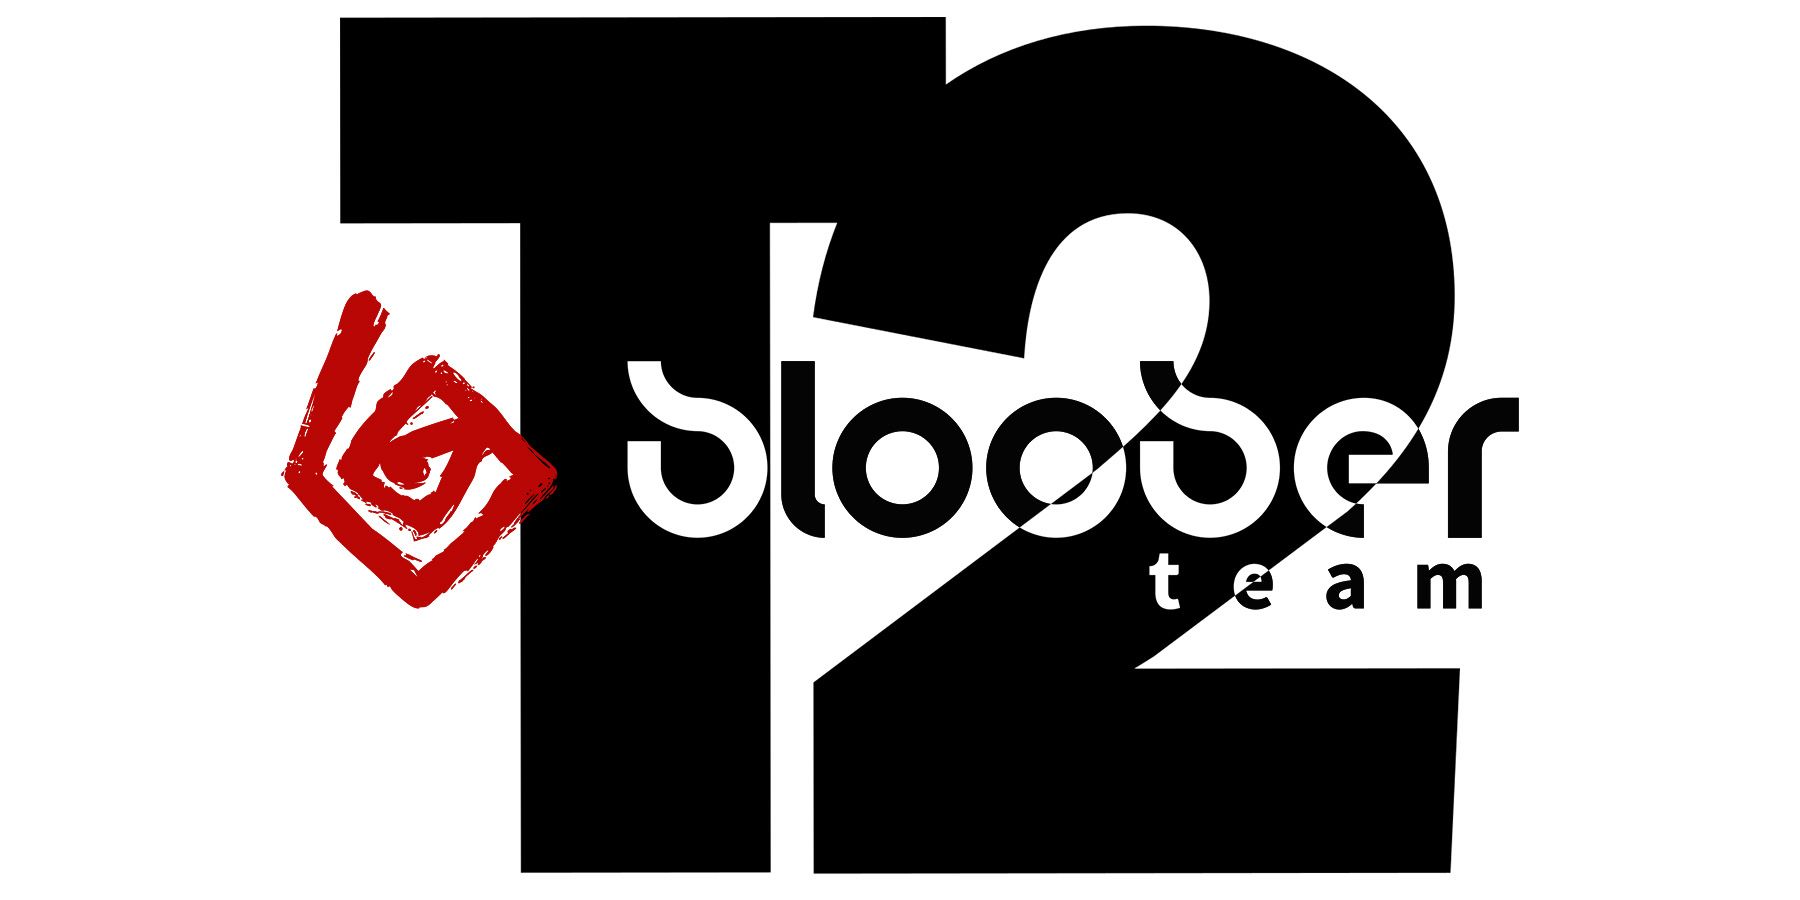 Bloober Team logo over Take-Two Interactive logo on white background